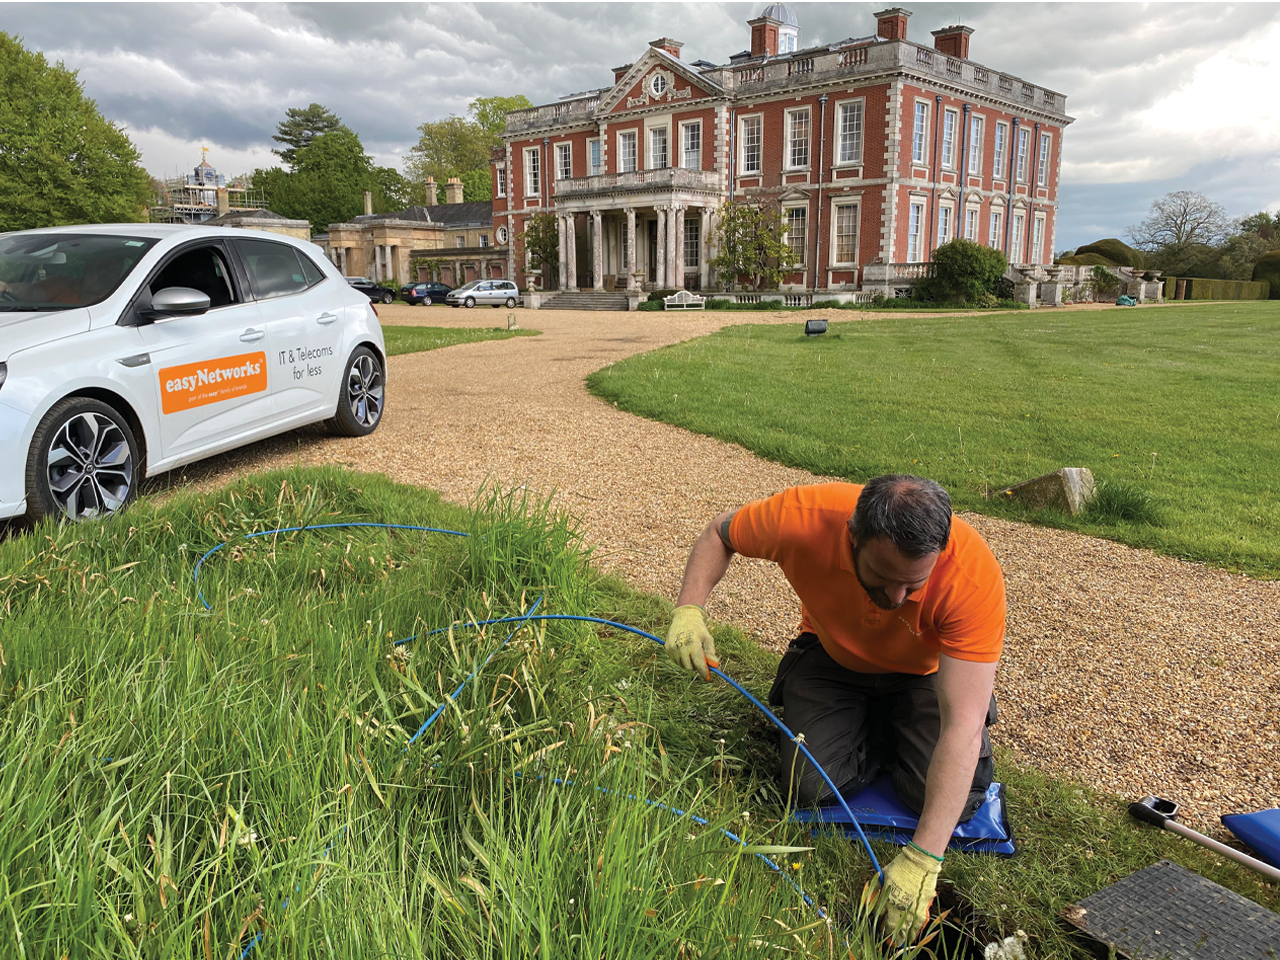 easyNetworks brings Gigabit Fibre to the Stansted Park Estate in only 12 weeks - with no environmental damage to the historic grounds